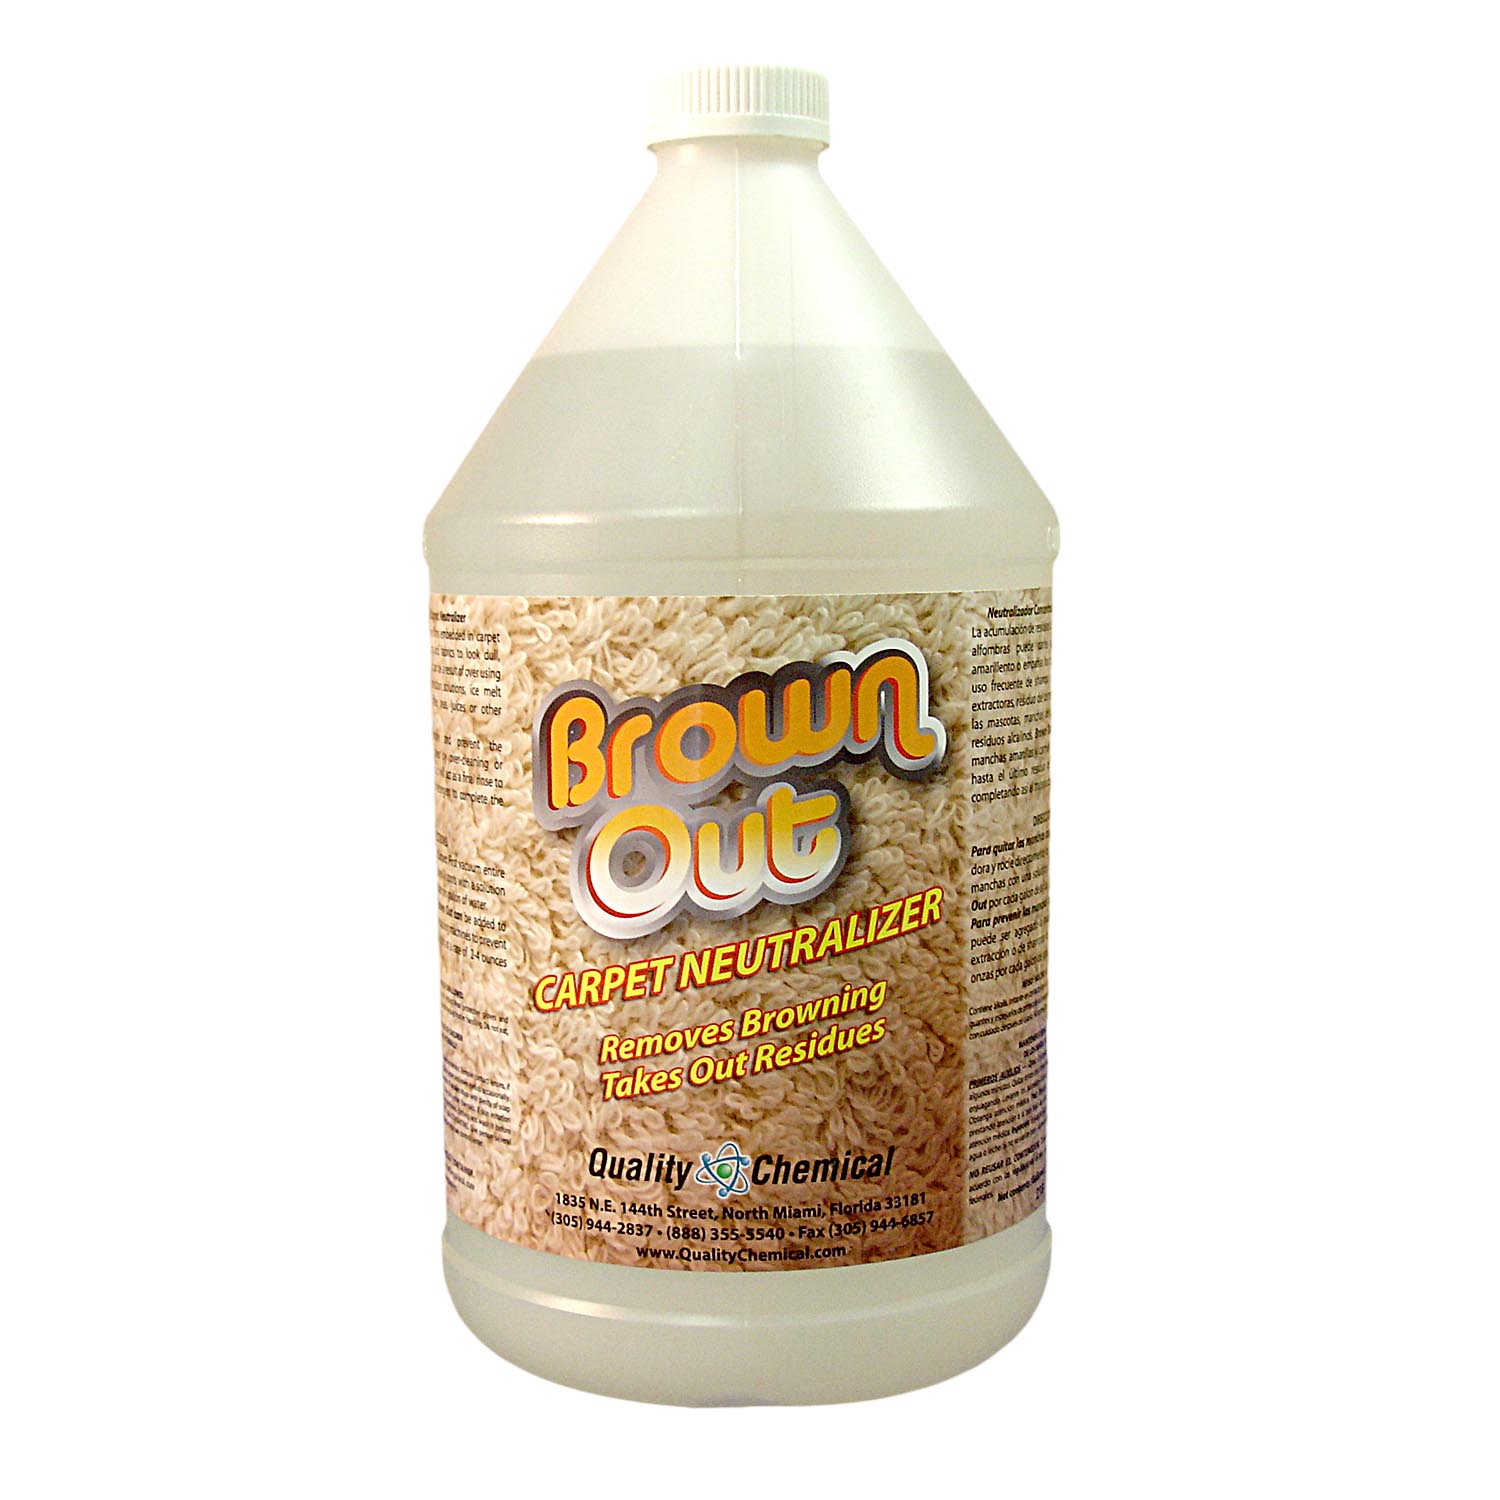 Brown Out Carpet Neutralizer & Stain Remover